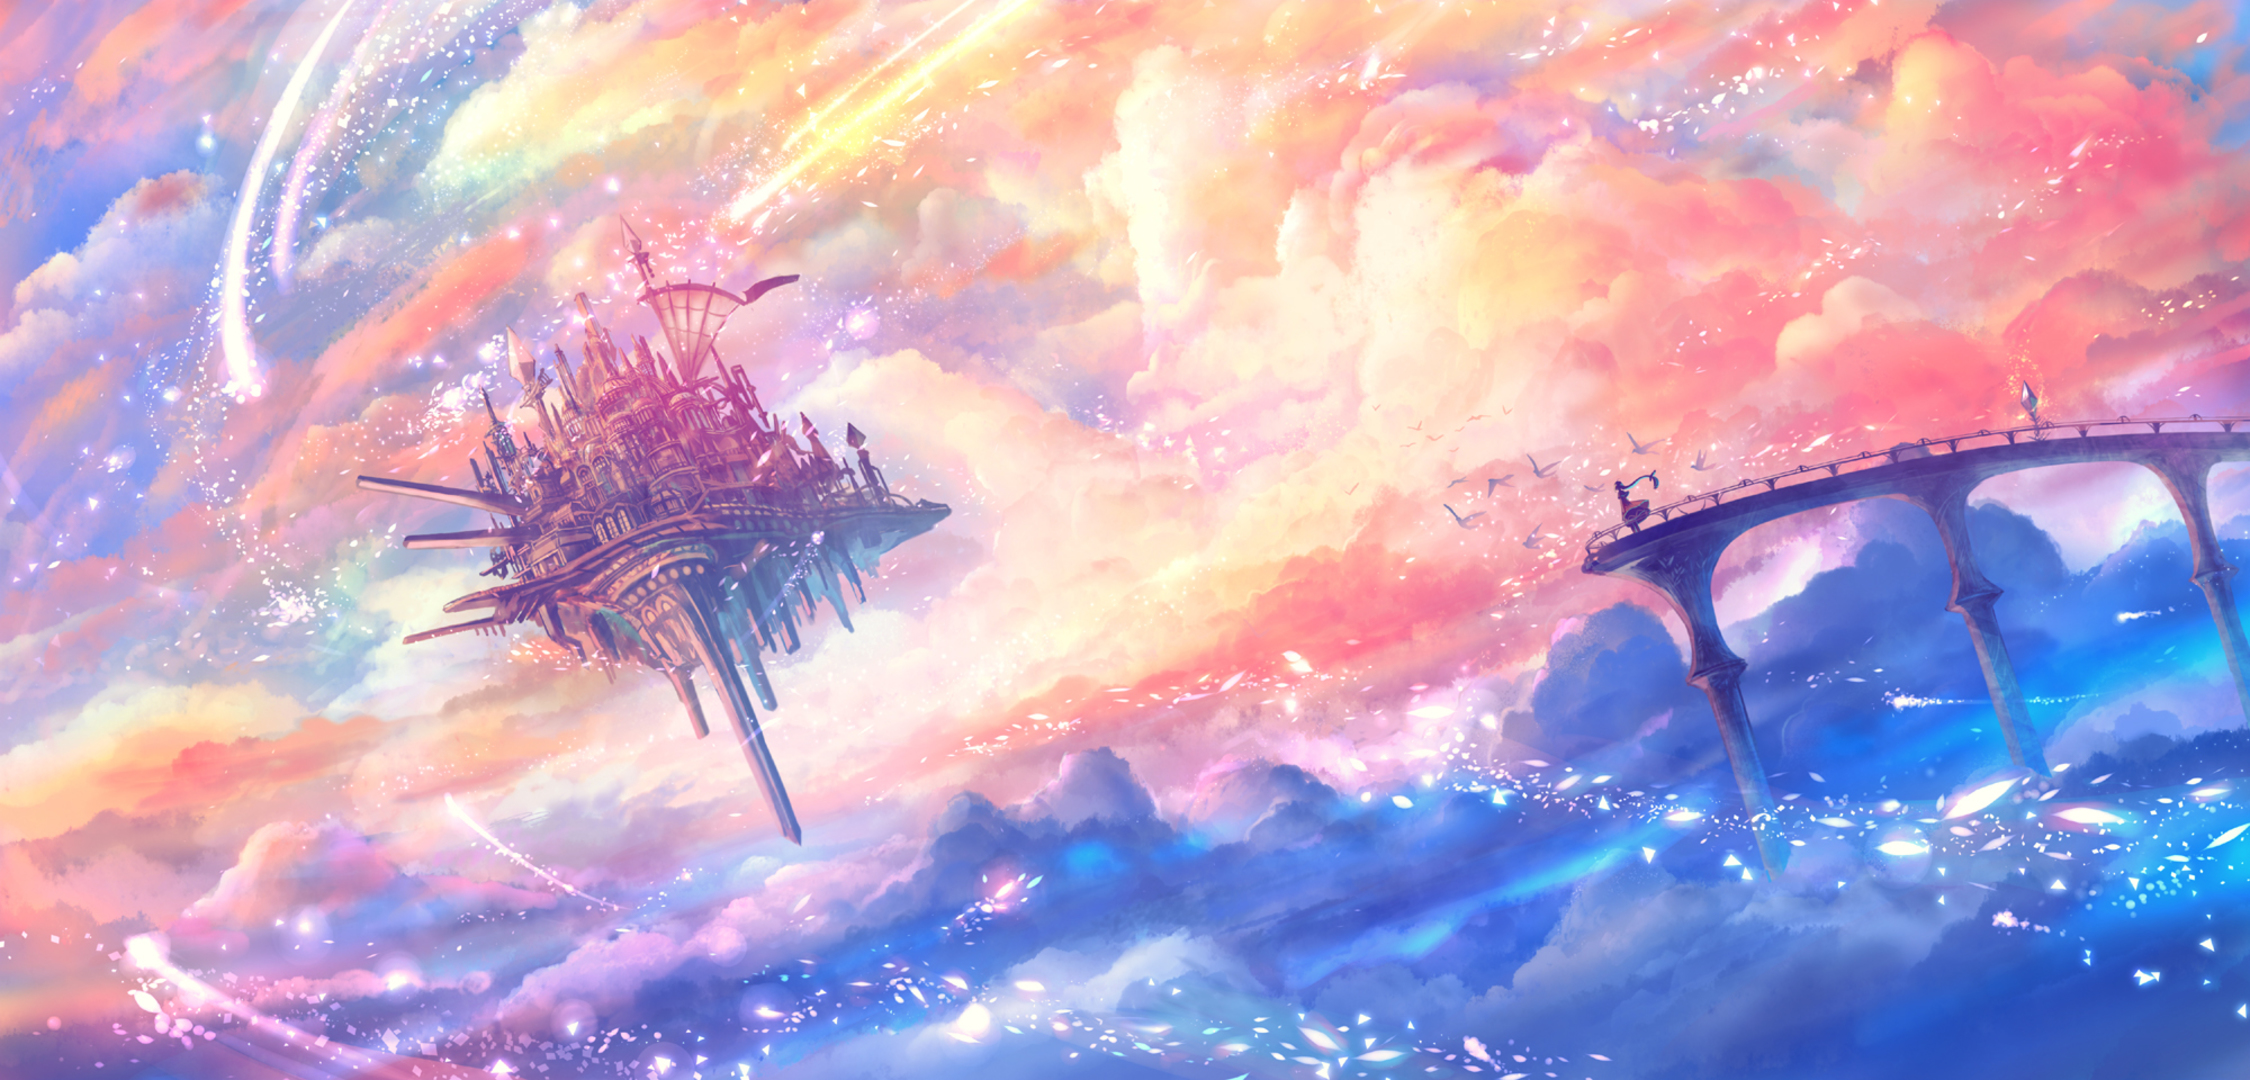 Epic art of floating islands over the clouds with majestic trees on